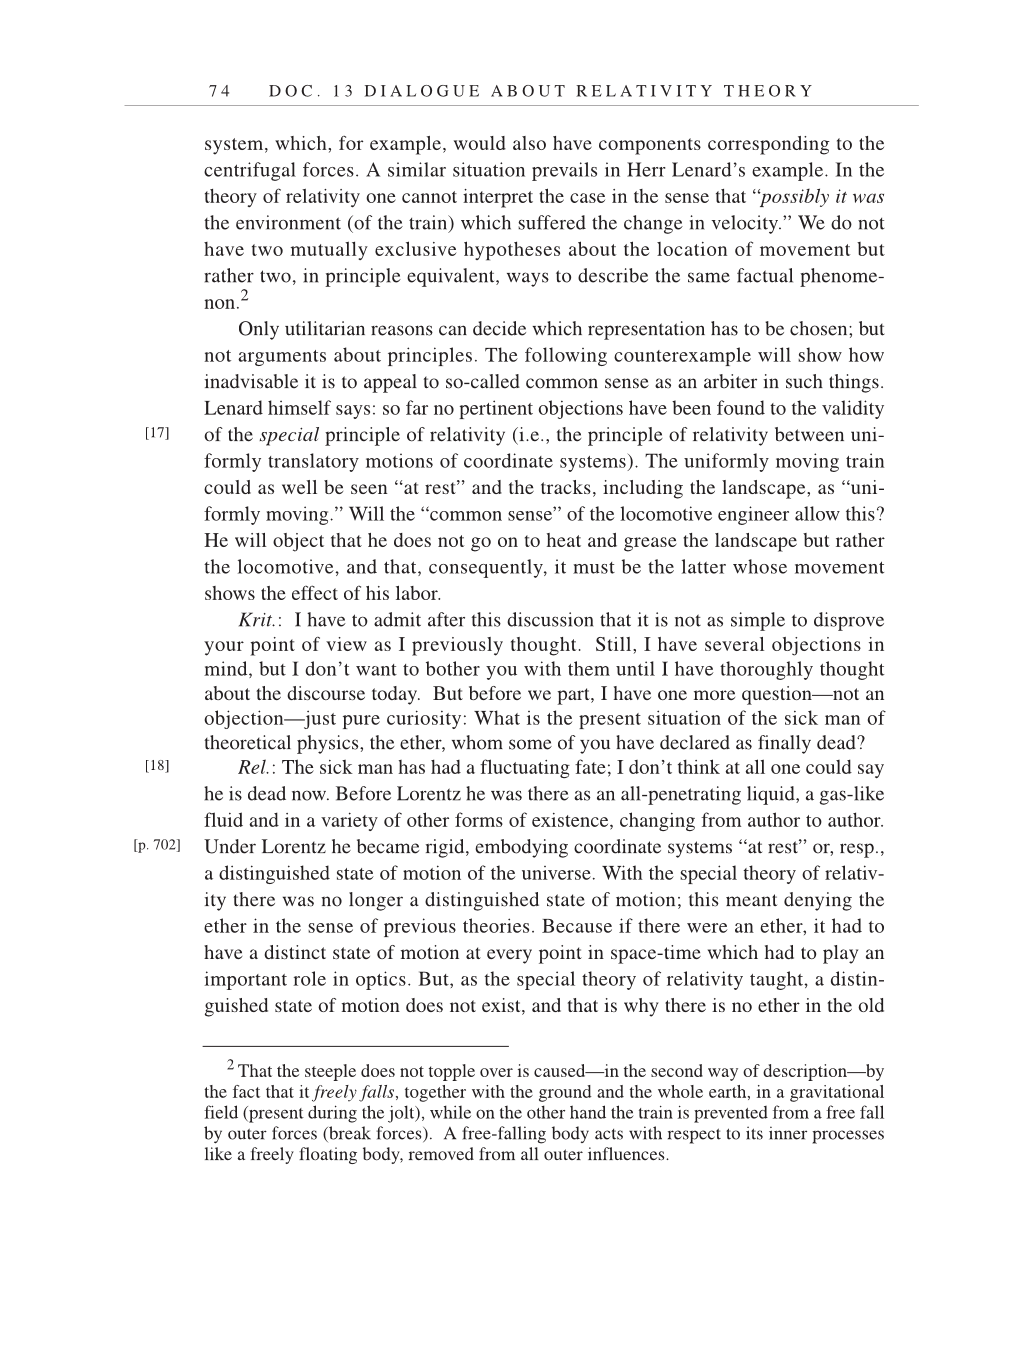 Volume 7: The Berlin Years: Writings, 1918-1921 (English translation supplement) page 74